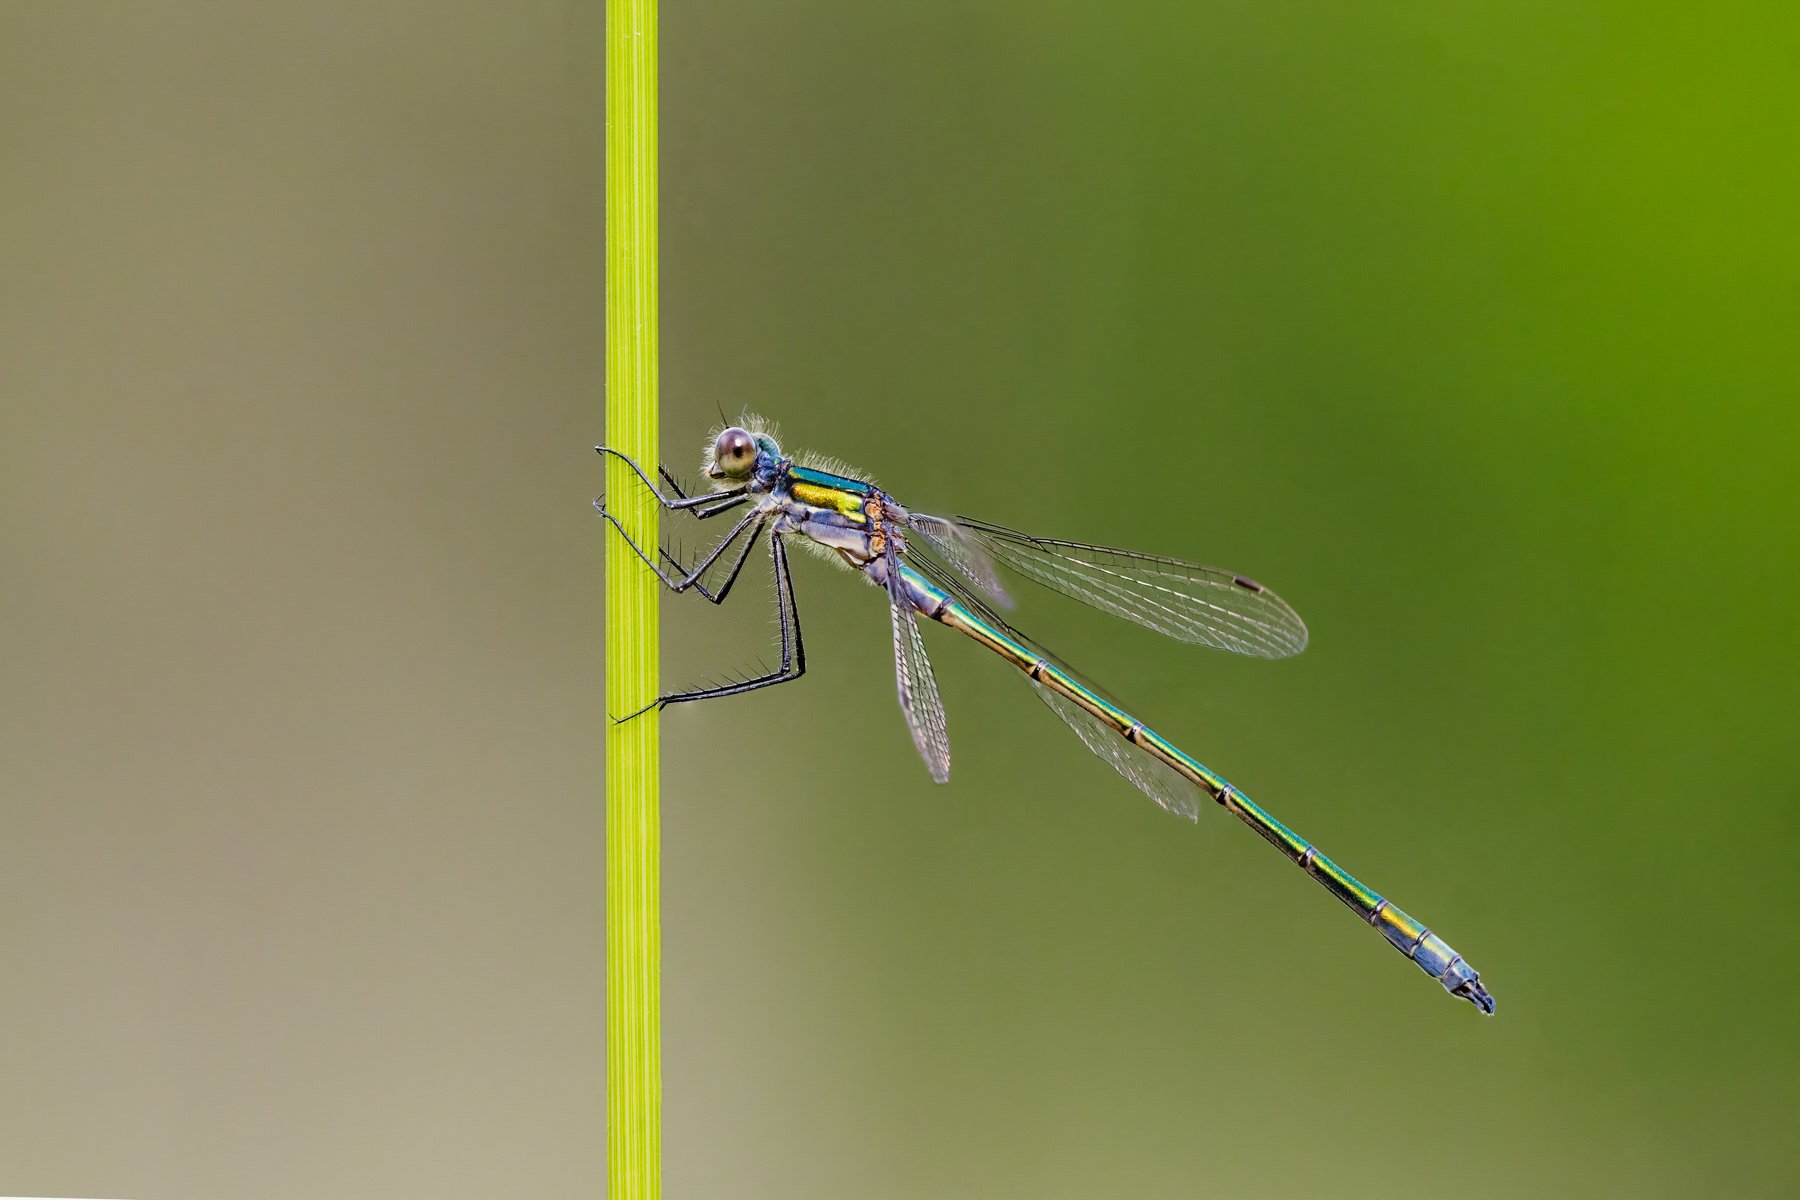 Emerald Damselfly at Rest by Barry Carter